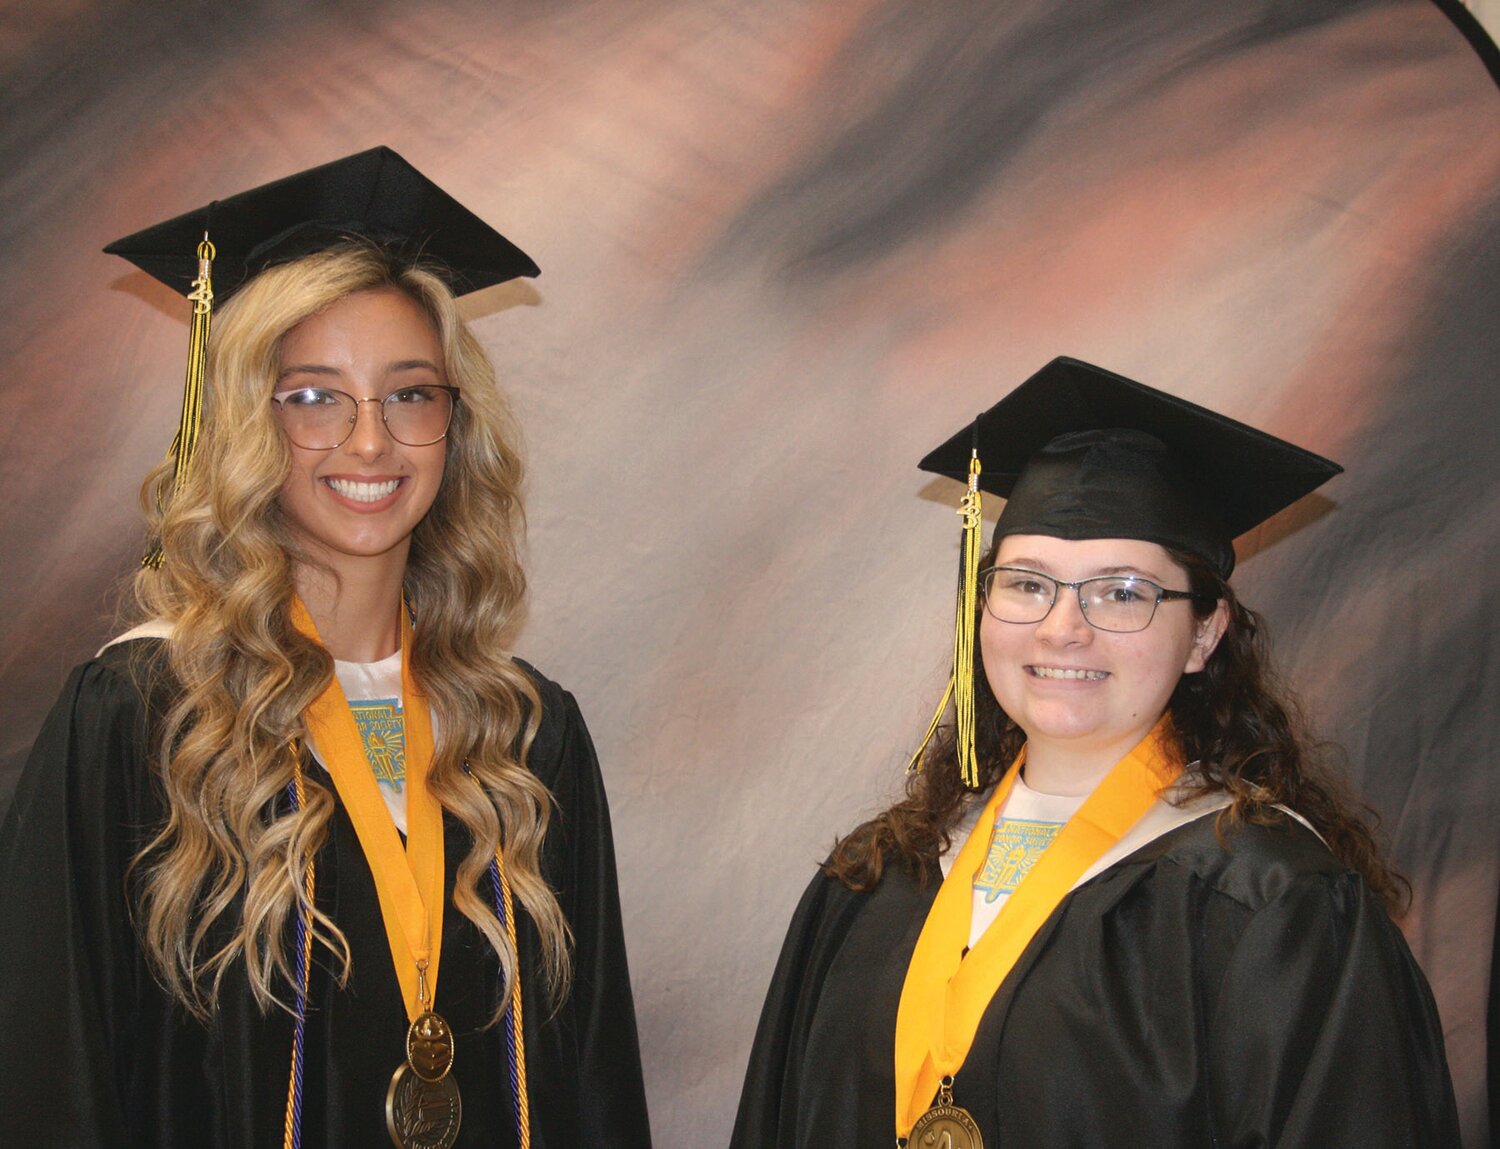 The Northeast R-IV top graduates are at left, Morgan McDonald, valedictorian, and Keira Burbank, salutatorian. Morgan is the daughter of Luke and Shirley McDonald and Jillian and Tommy Bragg. Keira is the daughter of Malena Burbank and Brian Burbank.